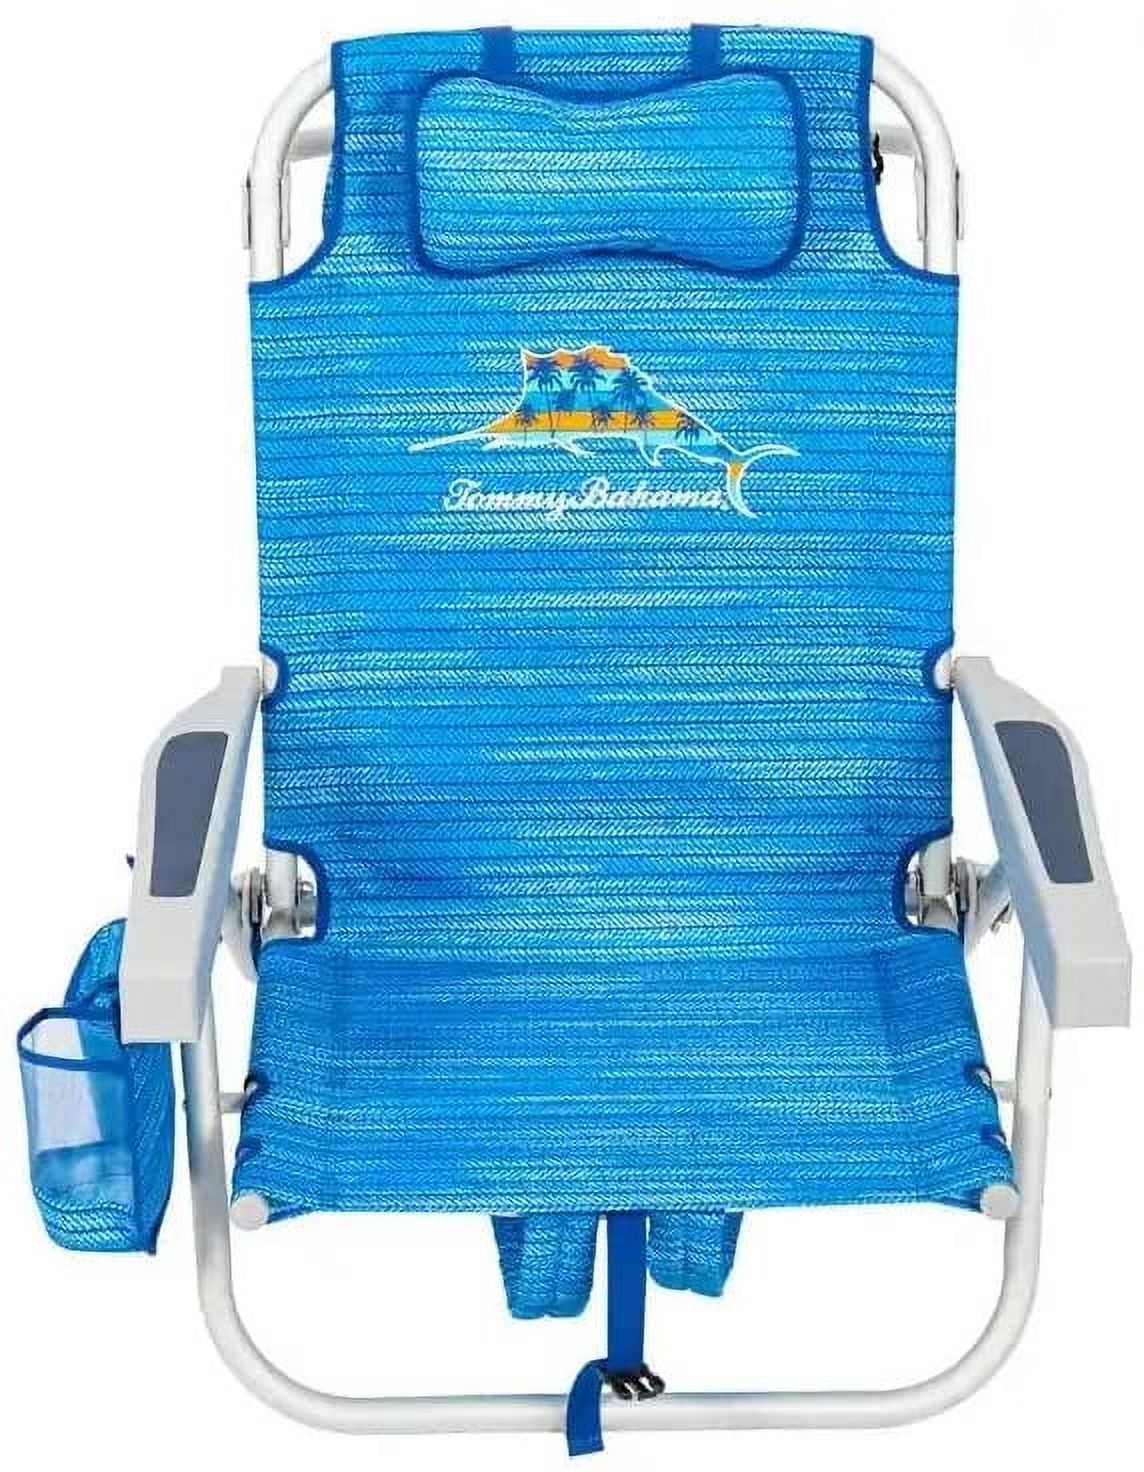 Tommy Bahama 5 Position Sailfish and Palms Backpack Beach Chair - image 2 of 4